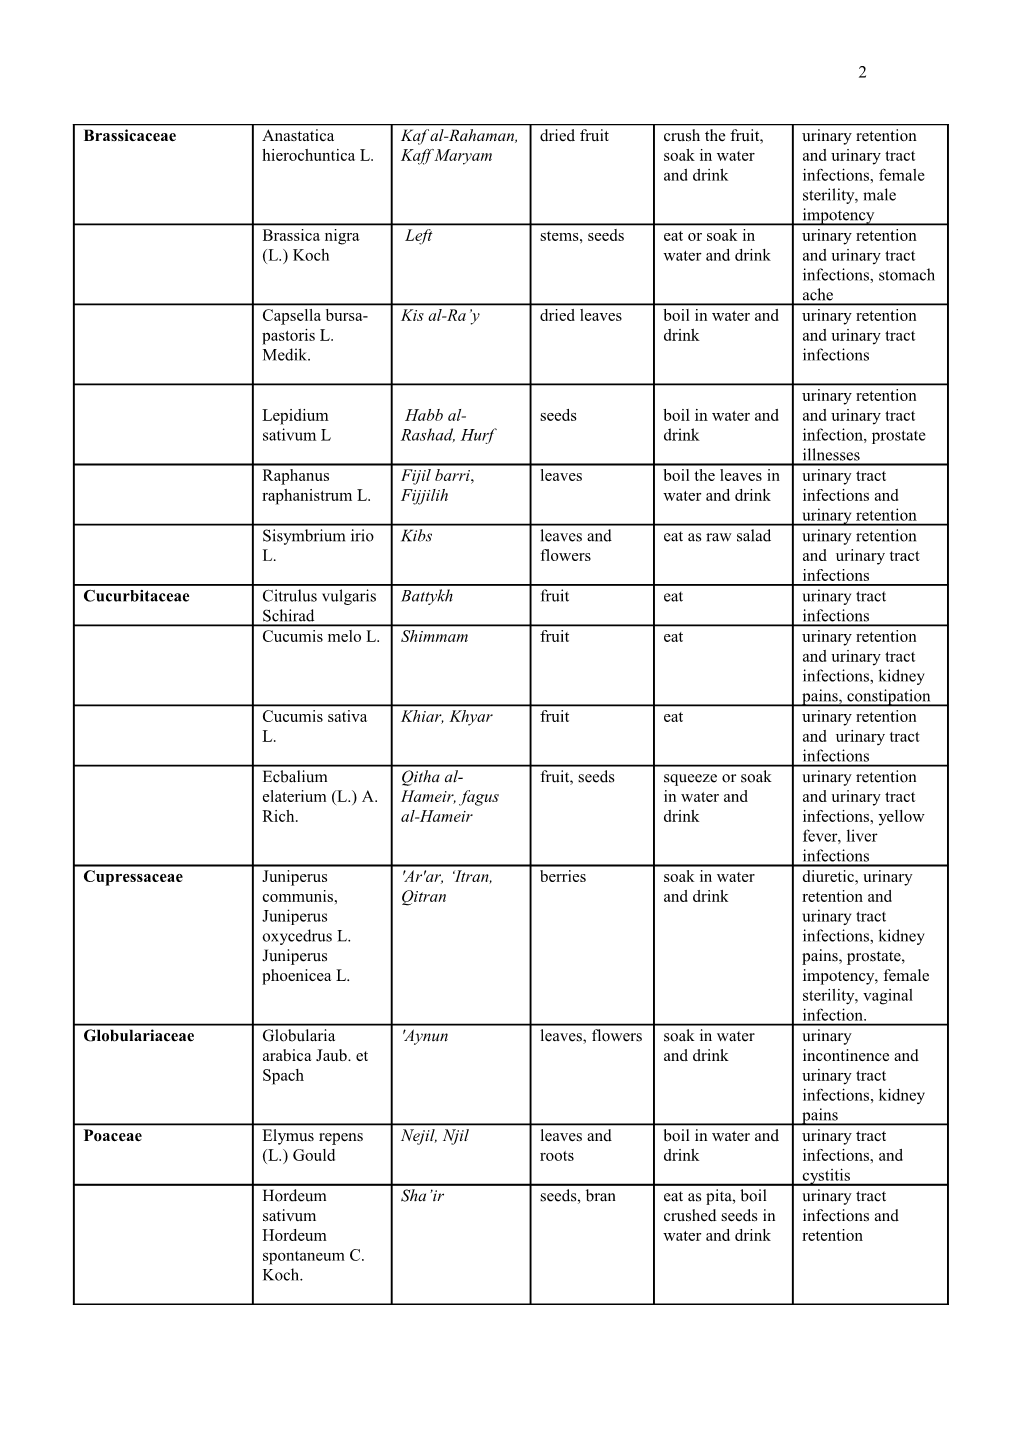 Table 1: URINARY DISEASES and ETHNOBOTANY AMONG PASTORAL NOMADS in the MIDDLE EAST